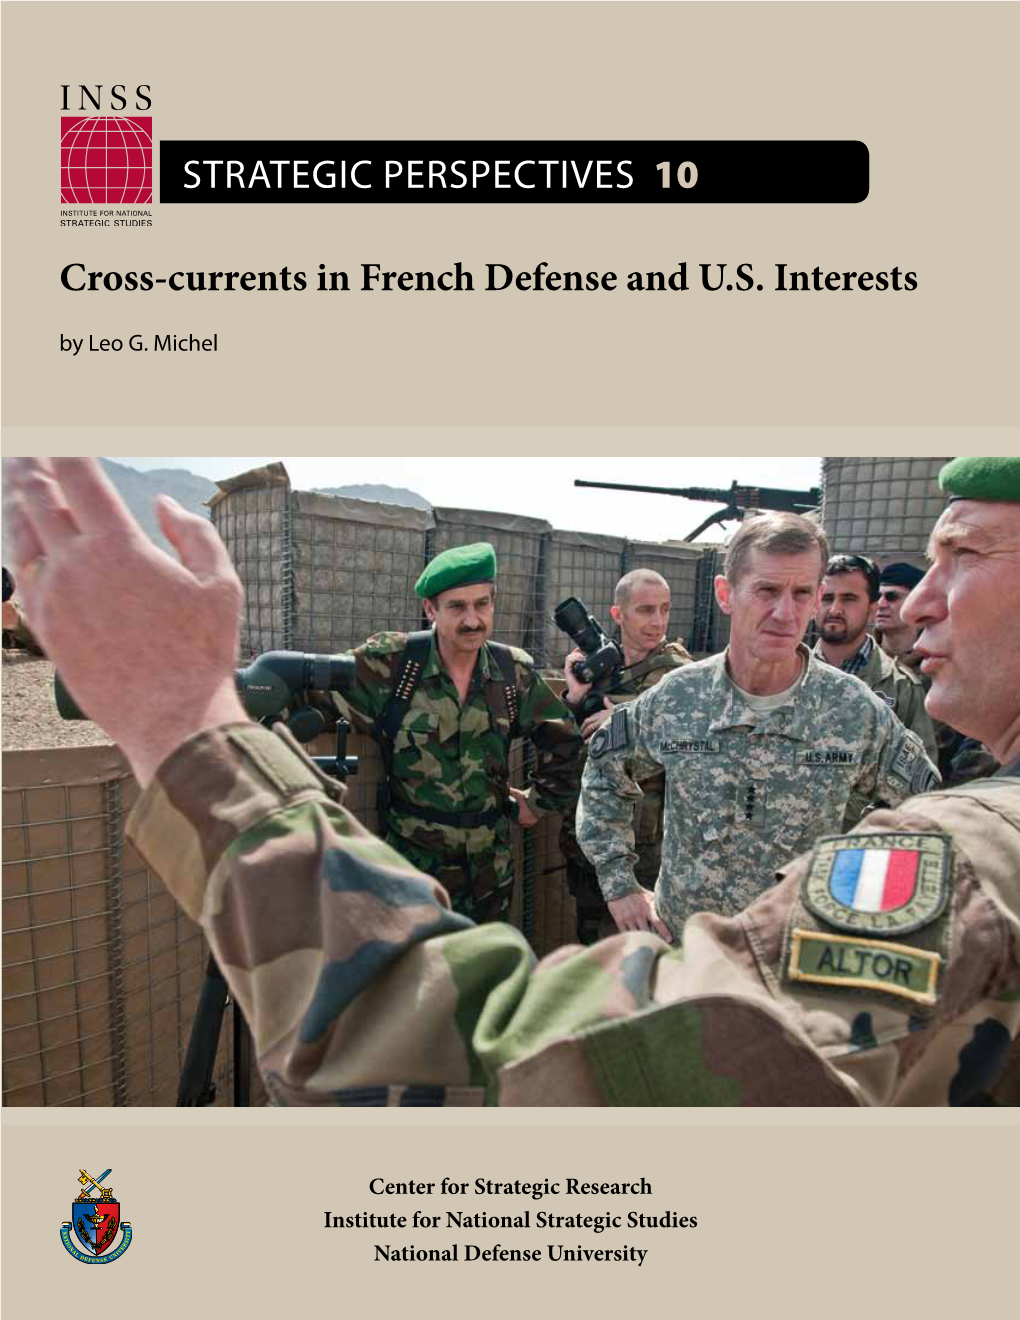 Cross-Currents in French Defense and U.S. Interests by Leo G